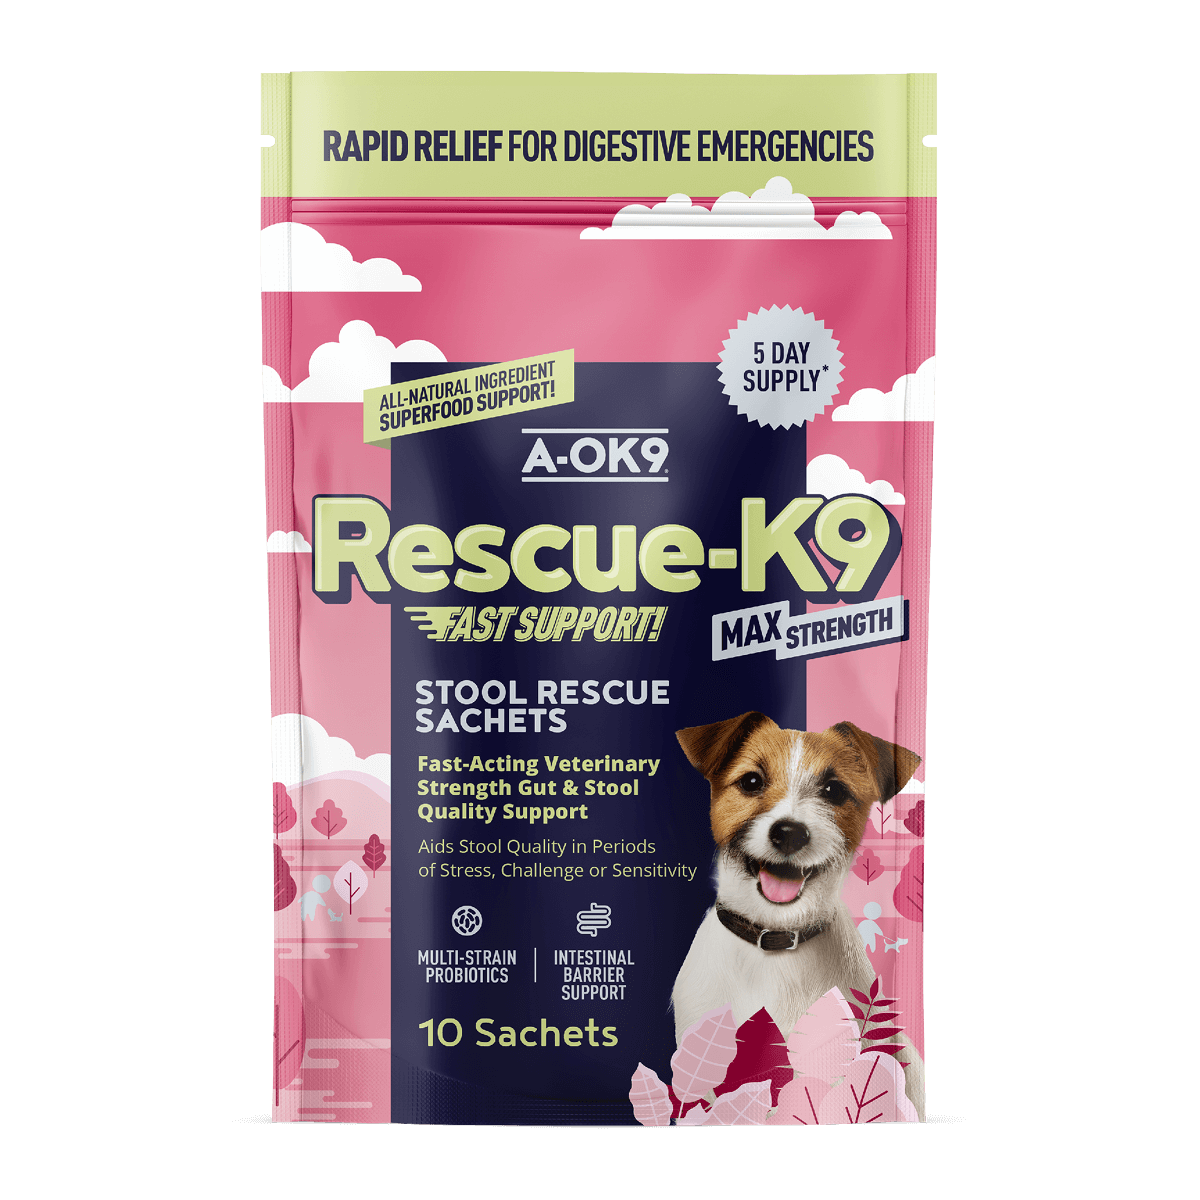 Rescue-K9: Pack of 10 Sachets